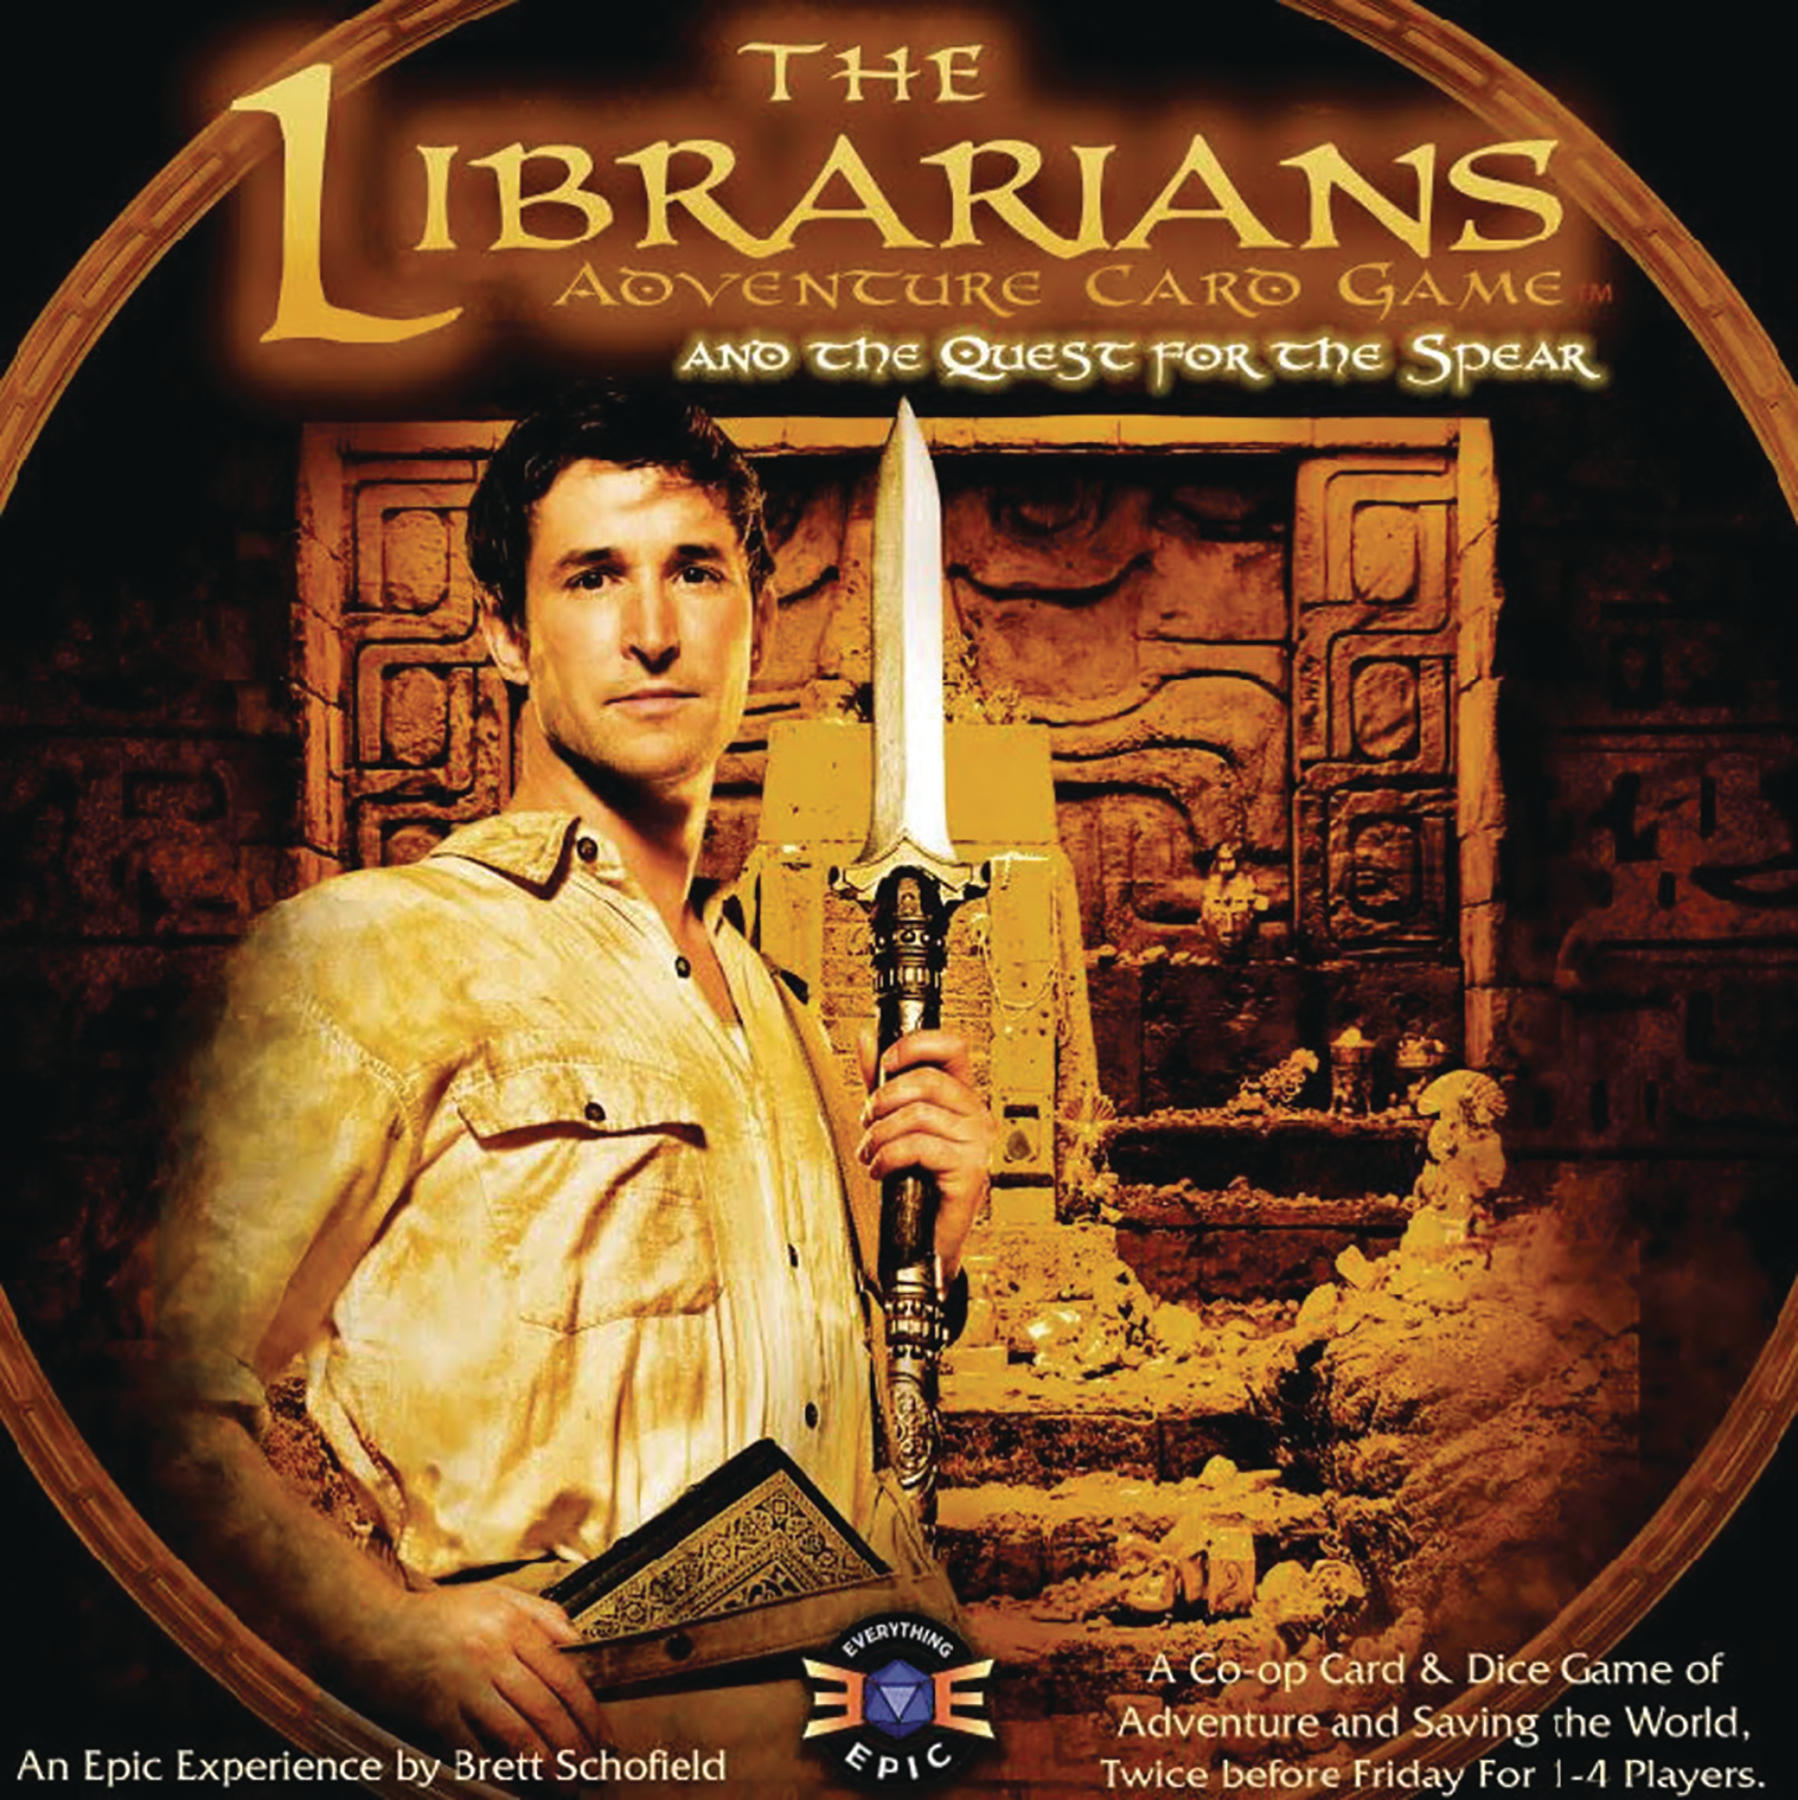 Librarians Adventure Card Game Quest For Spear Expansion